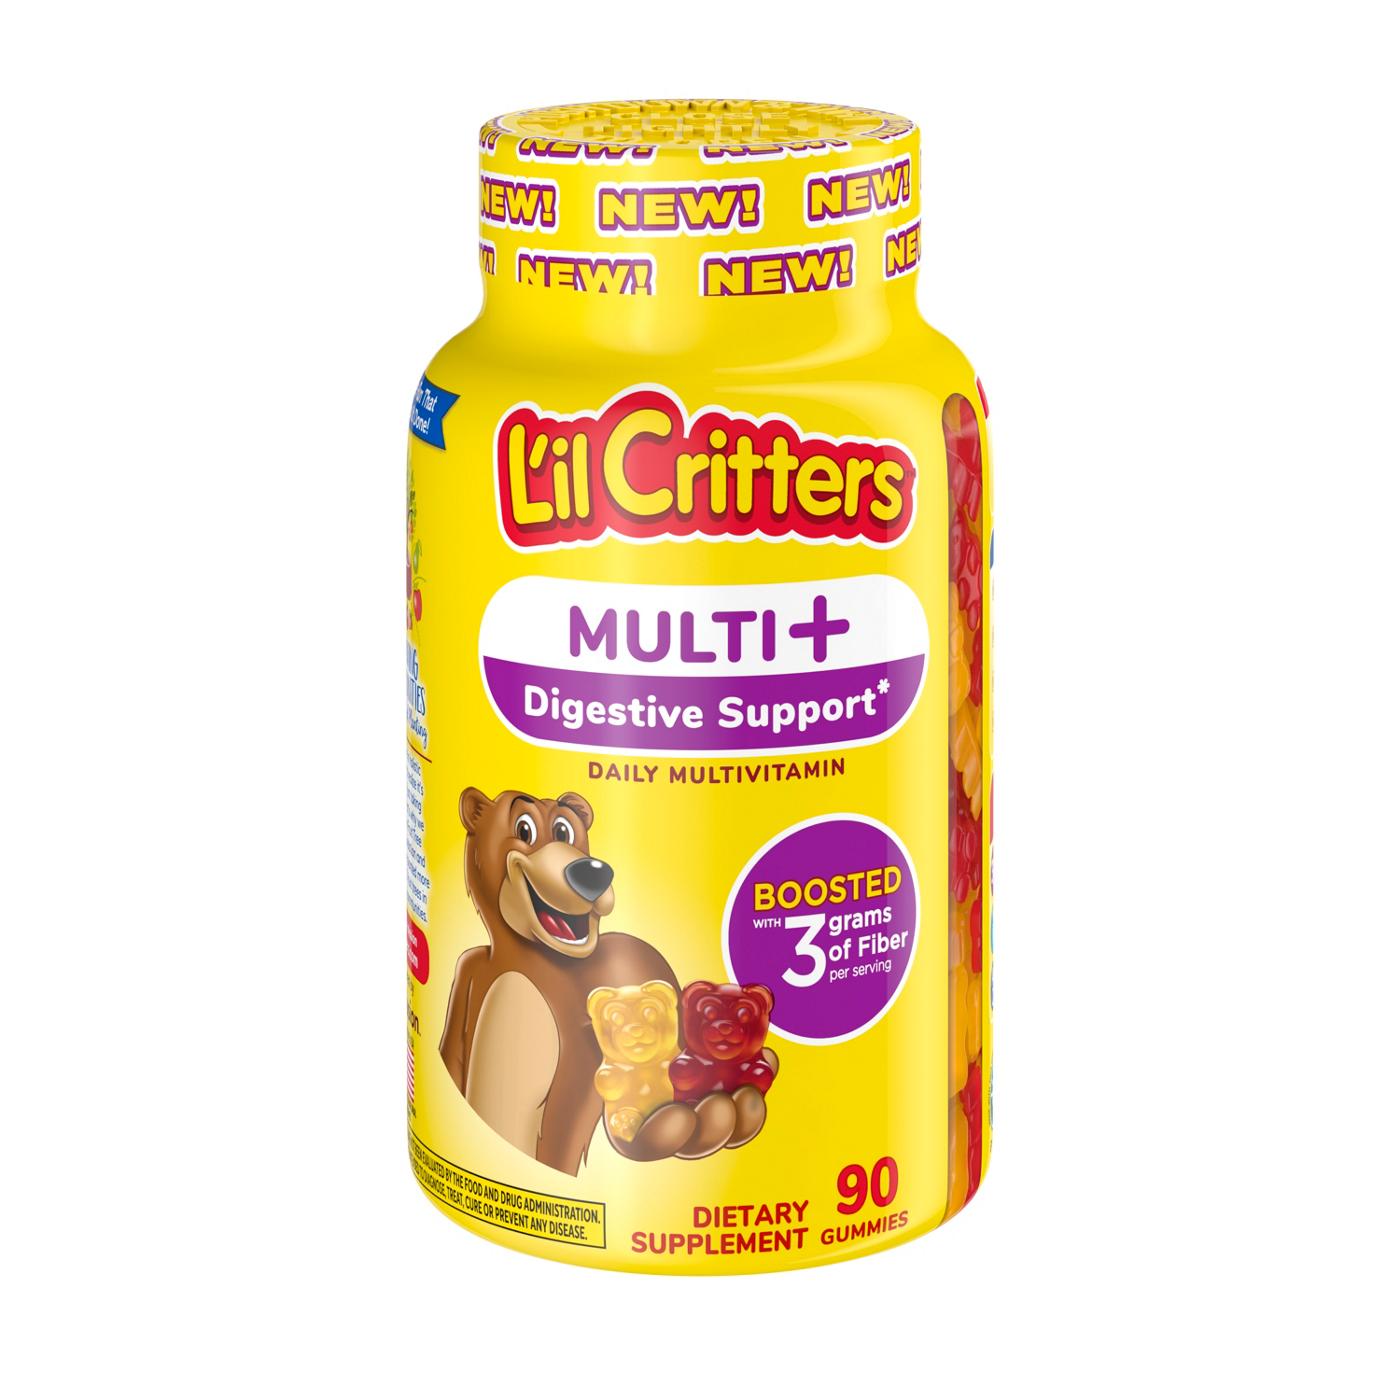 L'il Critters Multi + Digestive Support Gummies; image 1 of 3